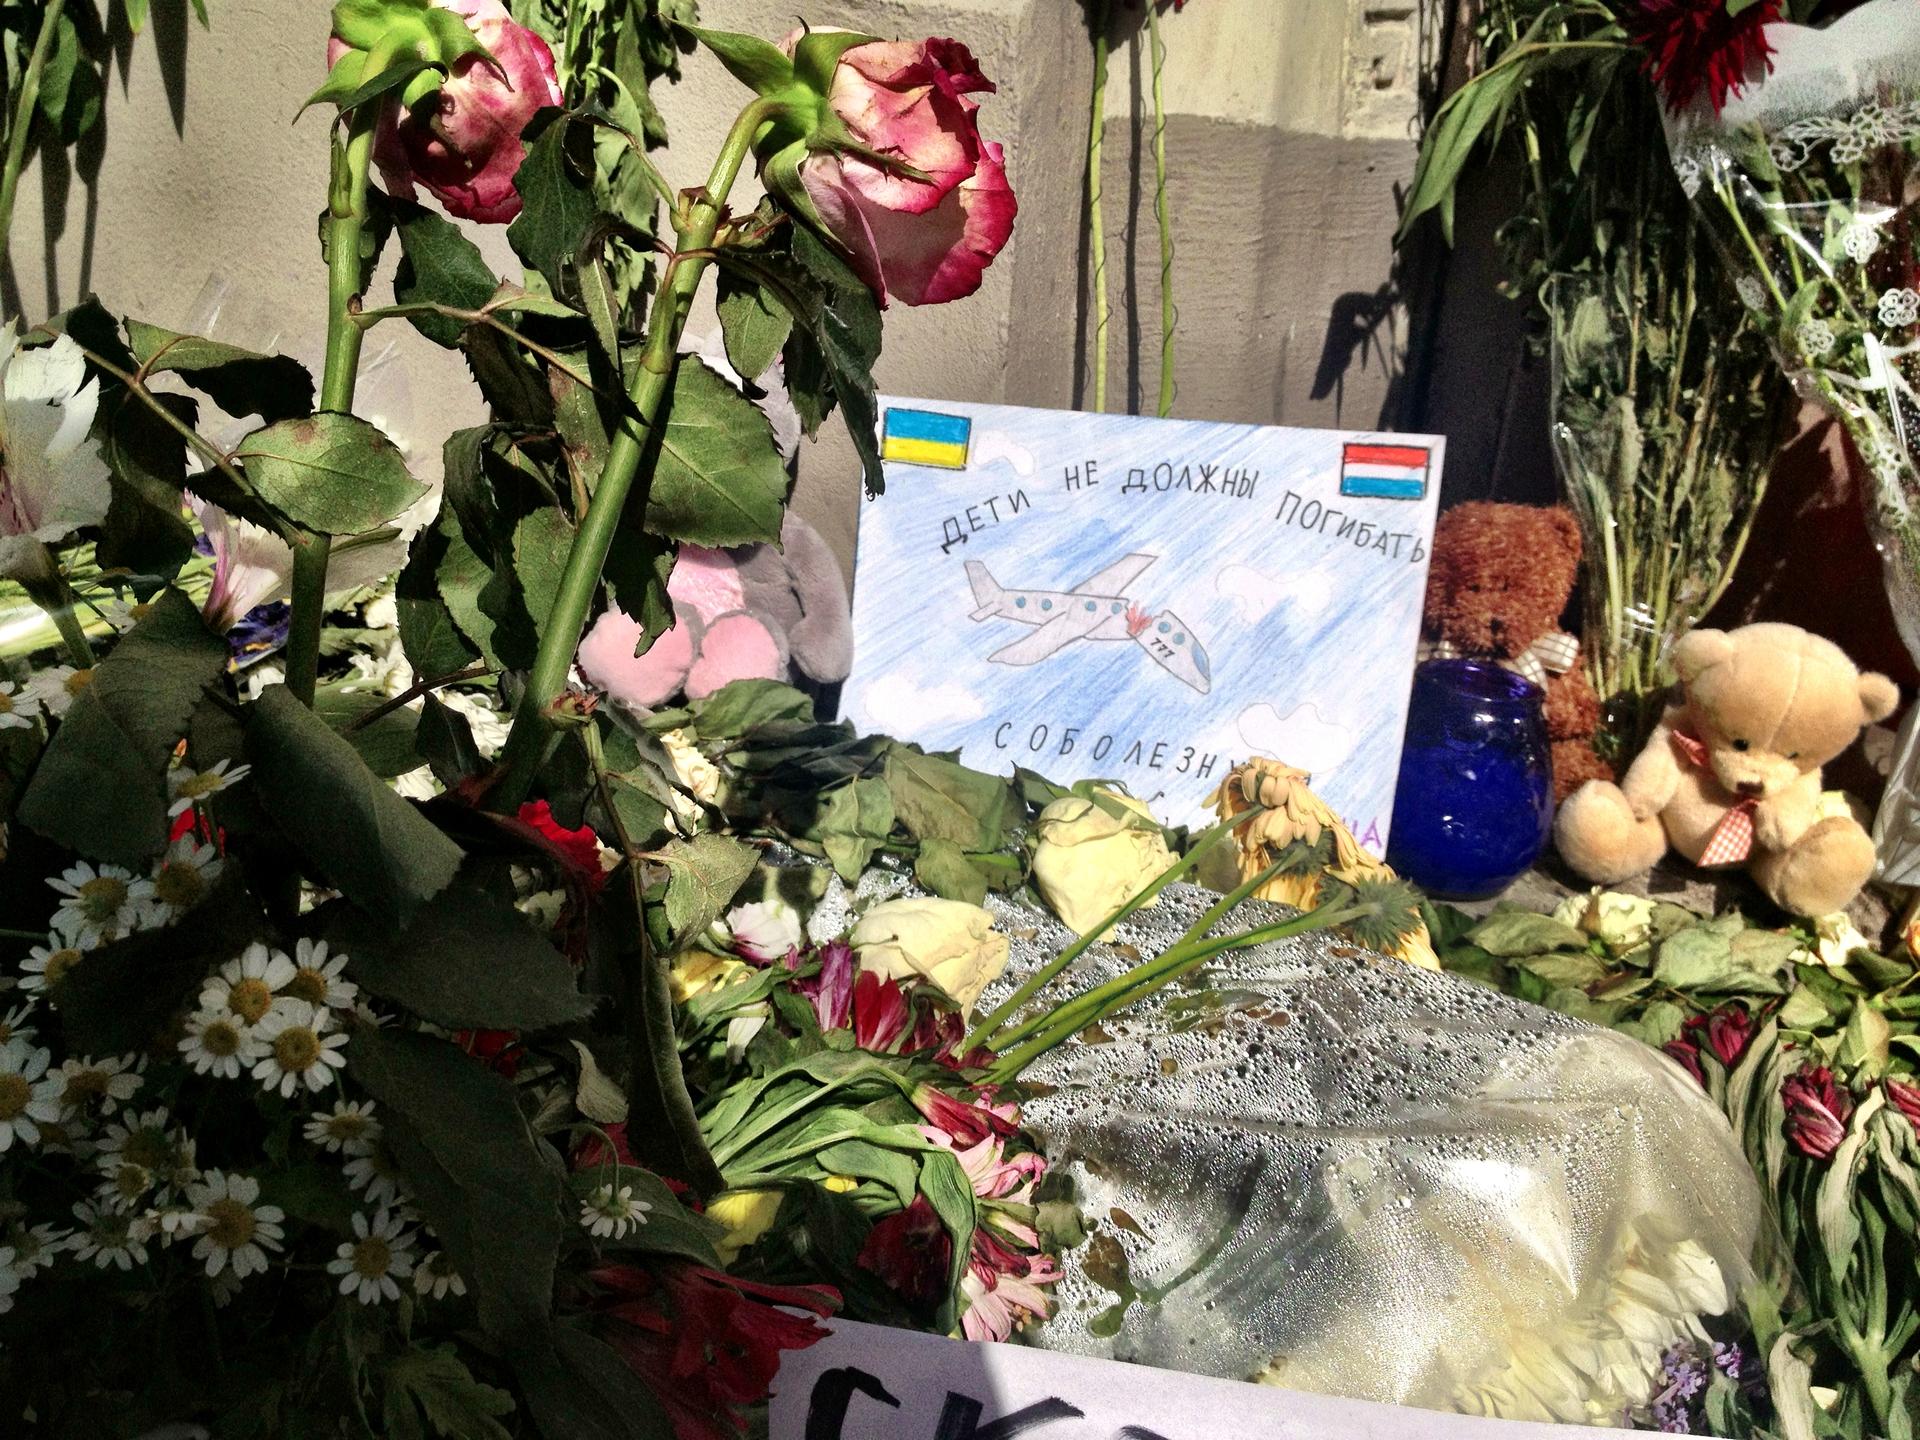 Russians have been lighting candles and leaving flowers and messages at the Dutch embassy in Moscow to show respect for the passengers who died on Malaysia Airlines Flight 17. Most of the victims were Dutch.